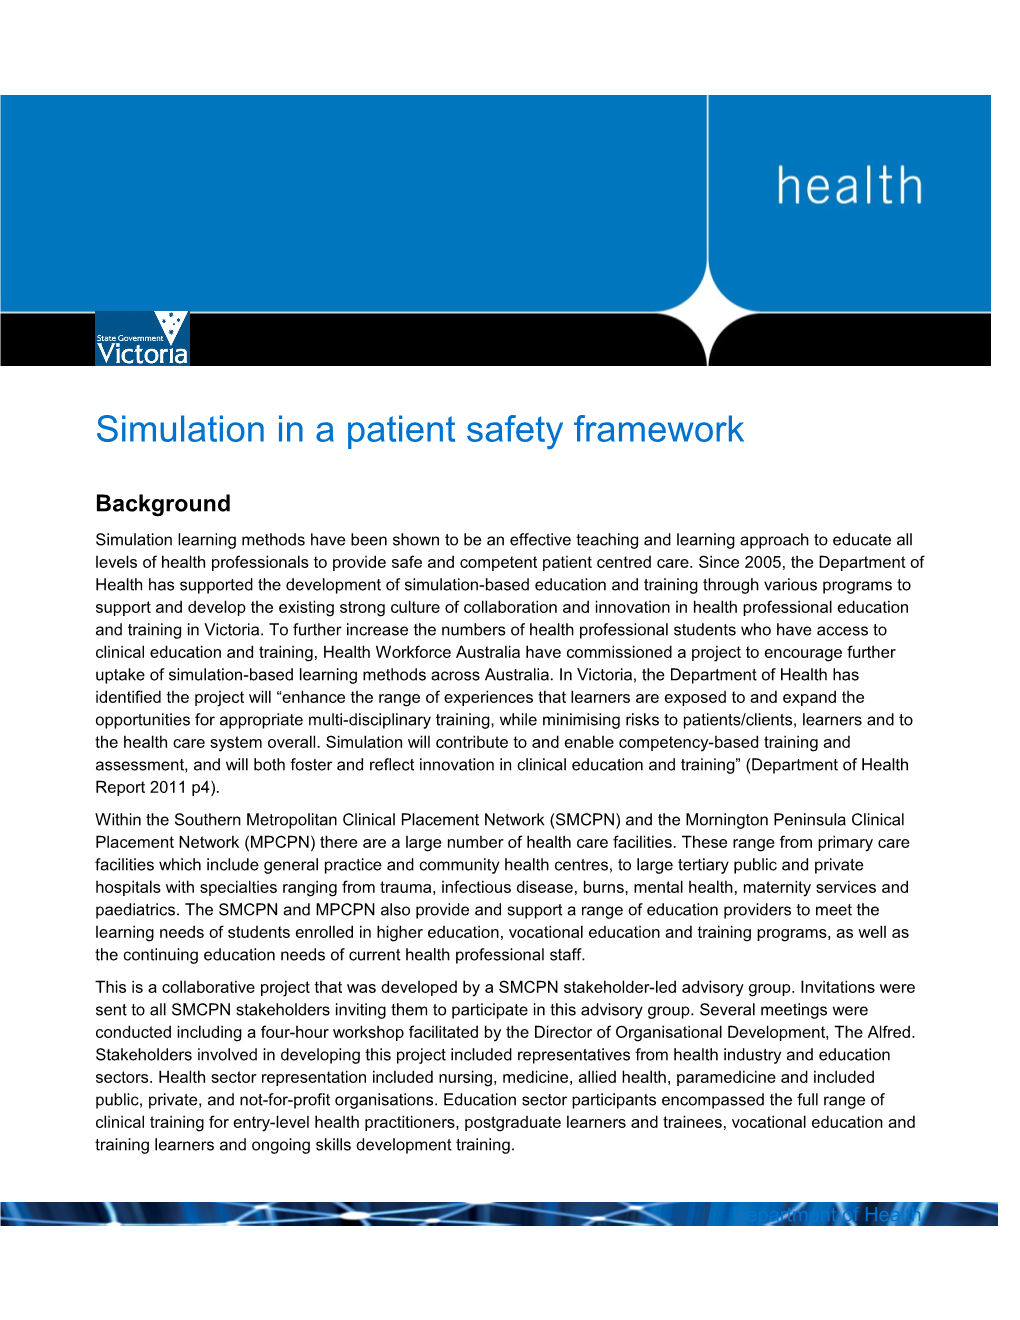 Simulation in a Patient Safety Framework